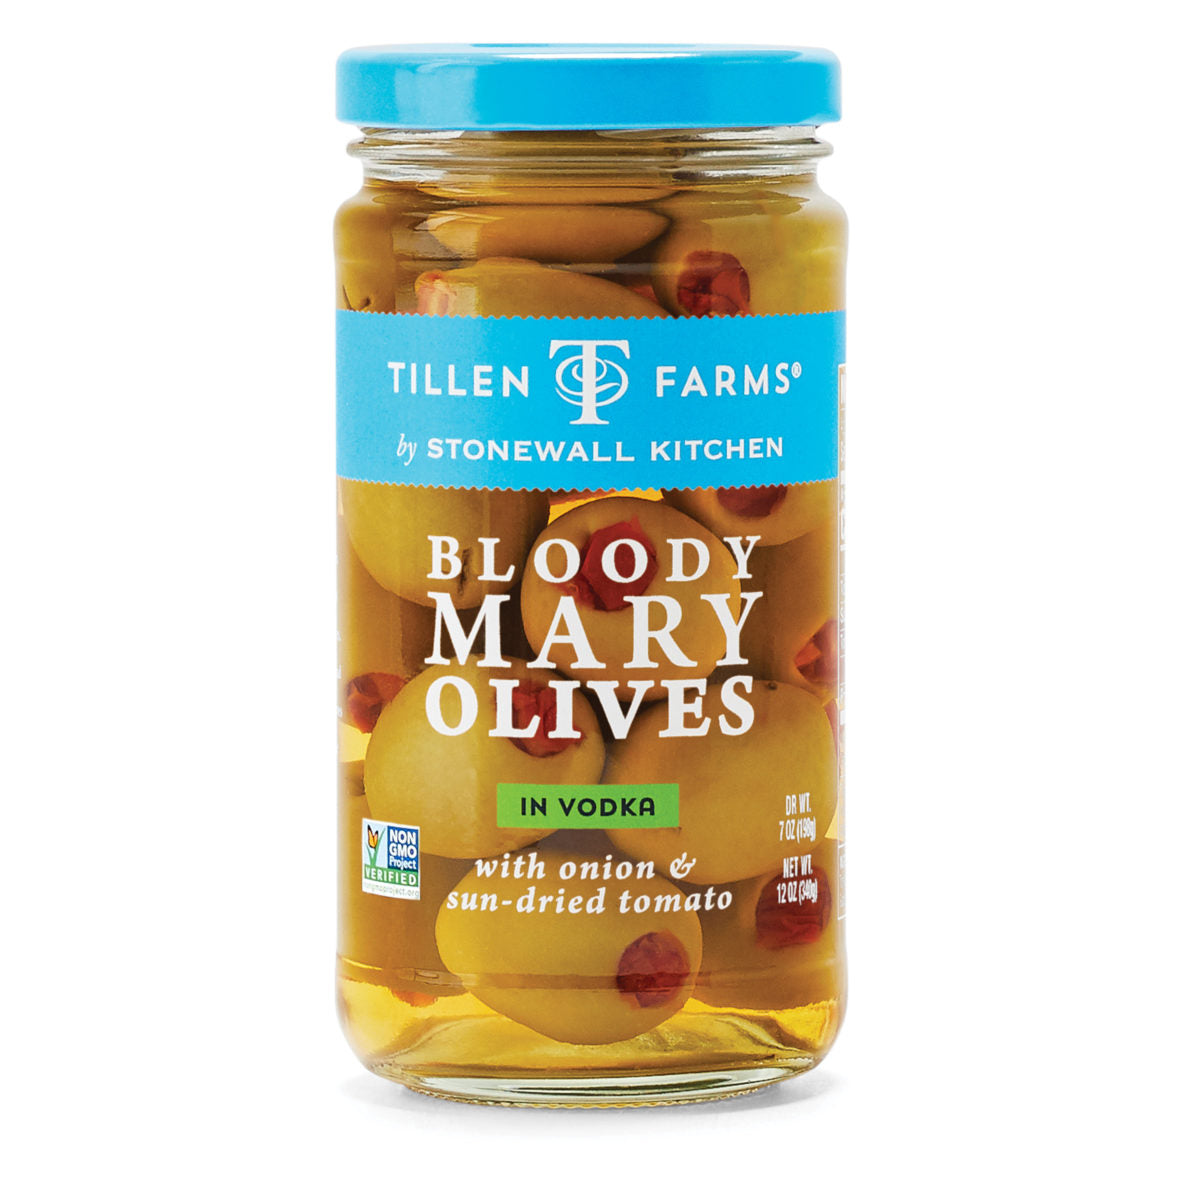 Tillen Farms Blood Mary Olives in Vodka with Onion & Sun-Dried Tomato - 12 oz (340g)